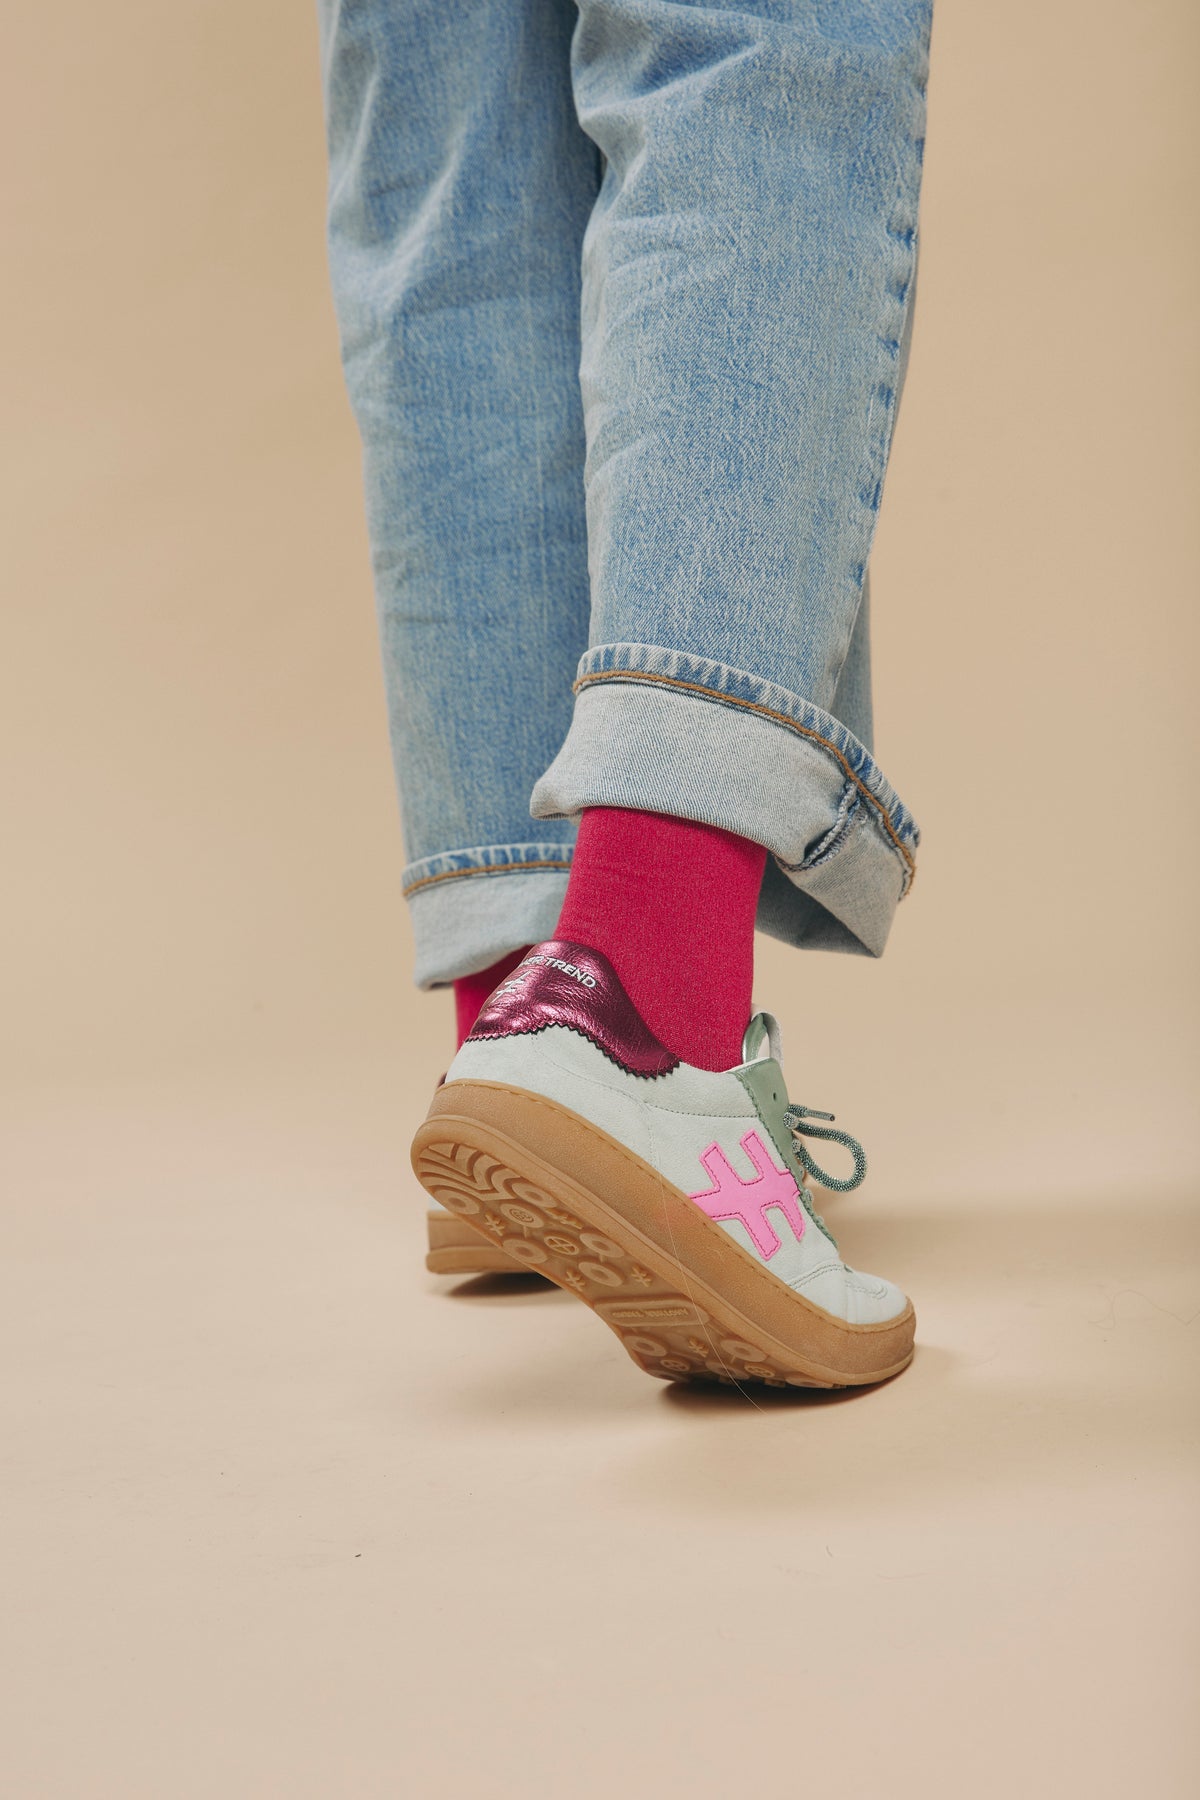 ANOTHER TREND- Mint and Cerise Pink Trainer [Preorder for early June]